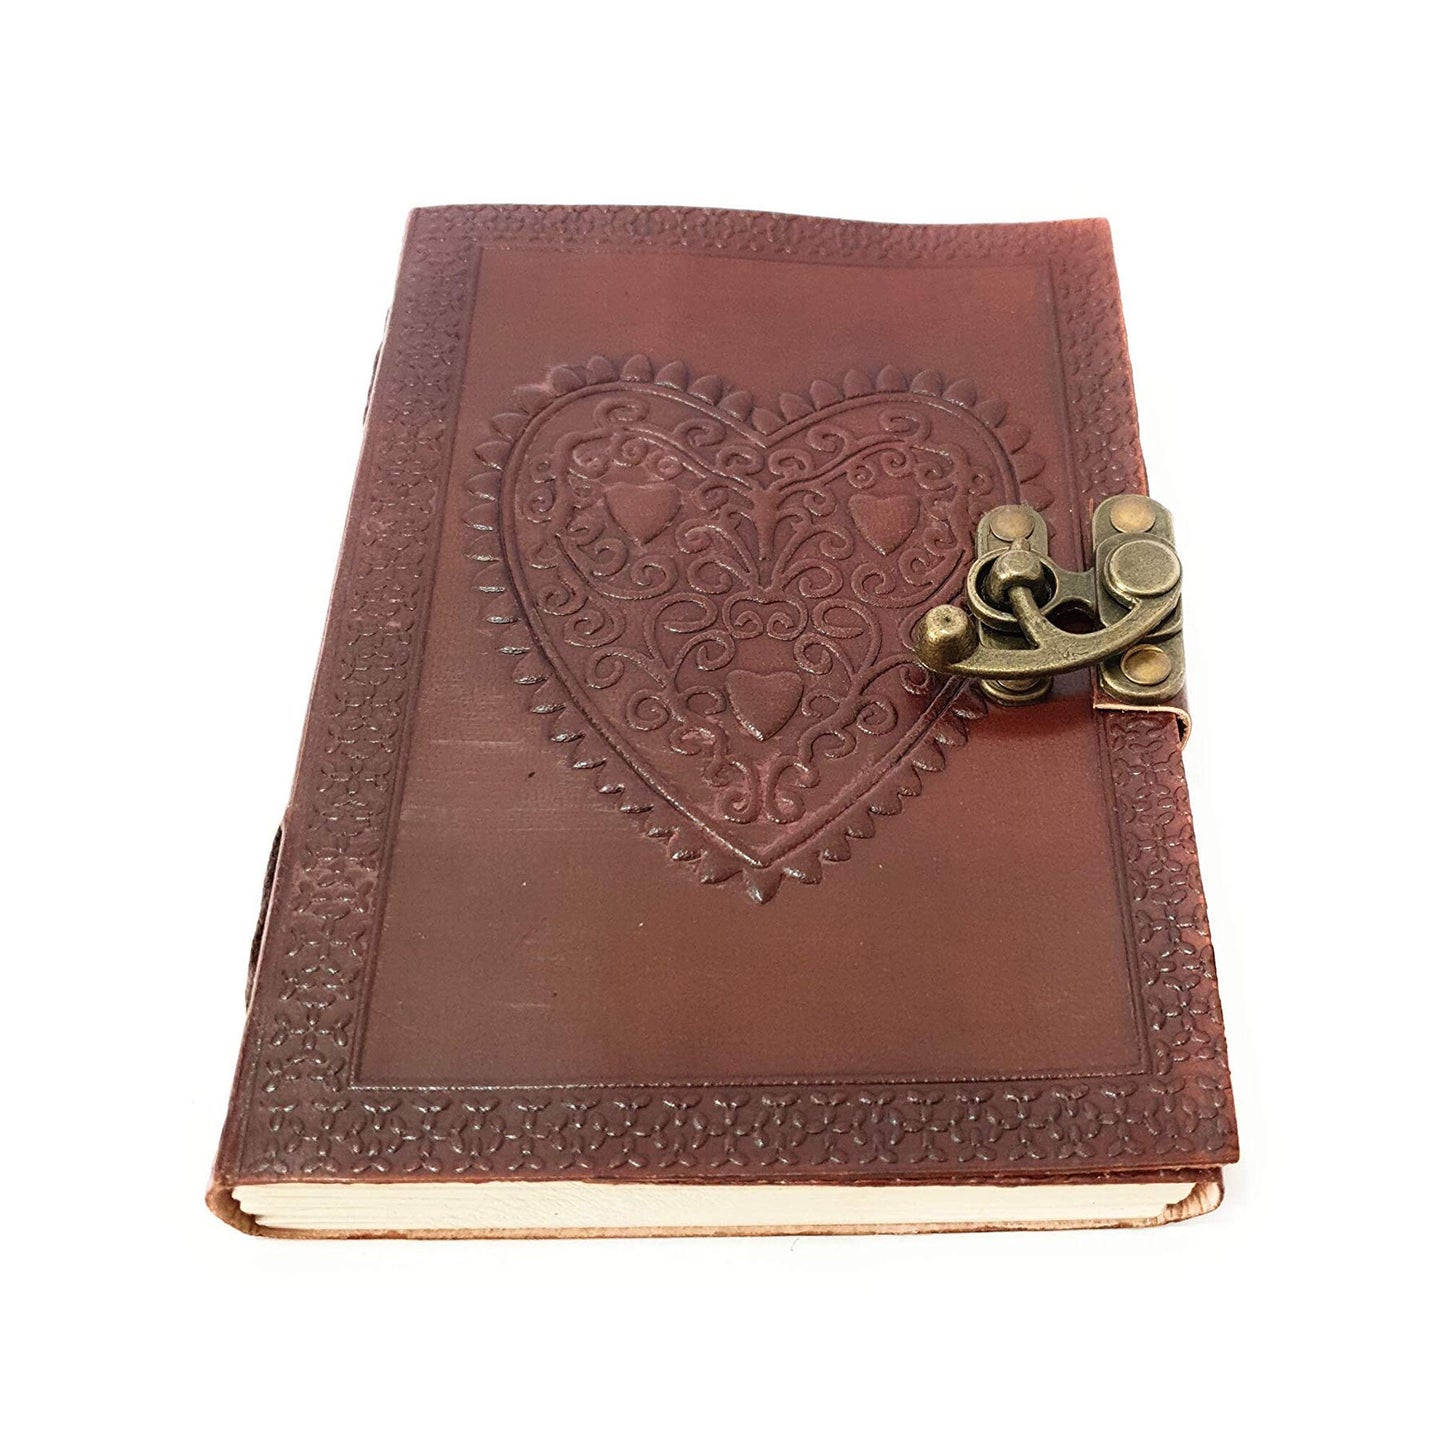 Genuine Leather Journal Heart Design Diary for Travel  C-lock Diary with Unlined Pages Vintage Travel Diary Christmas Gift